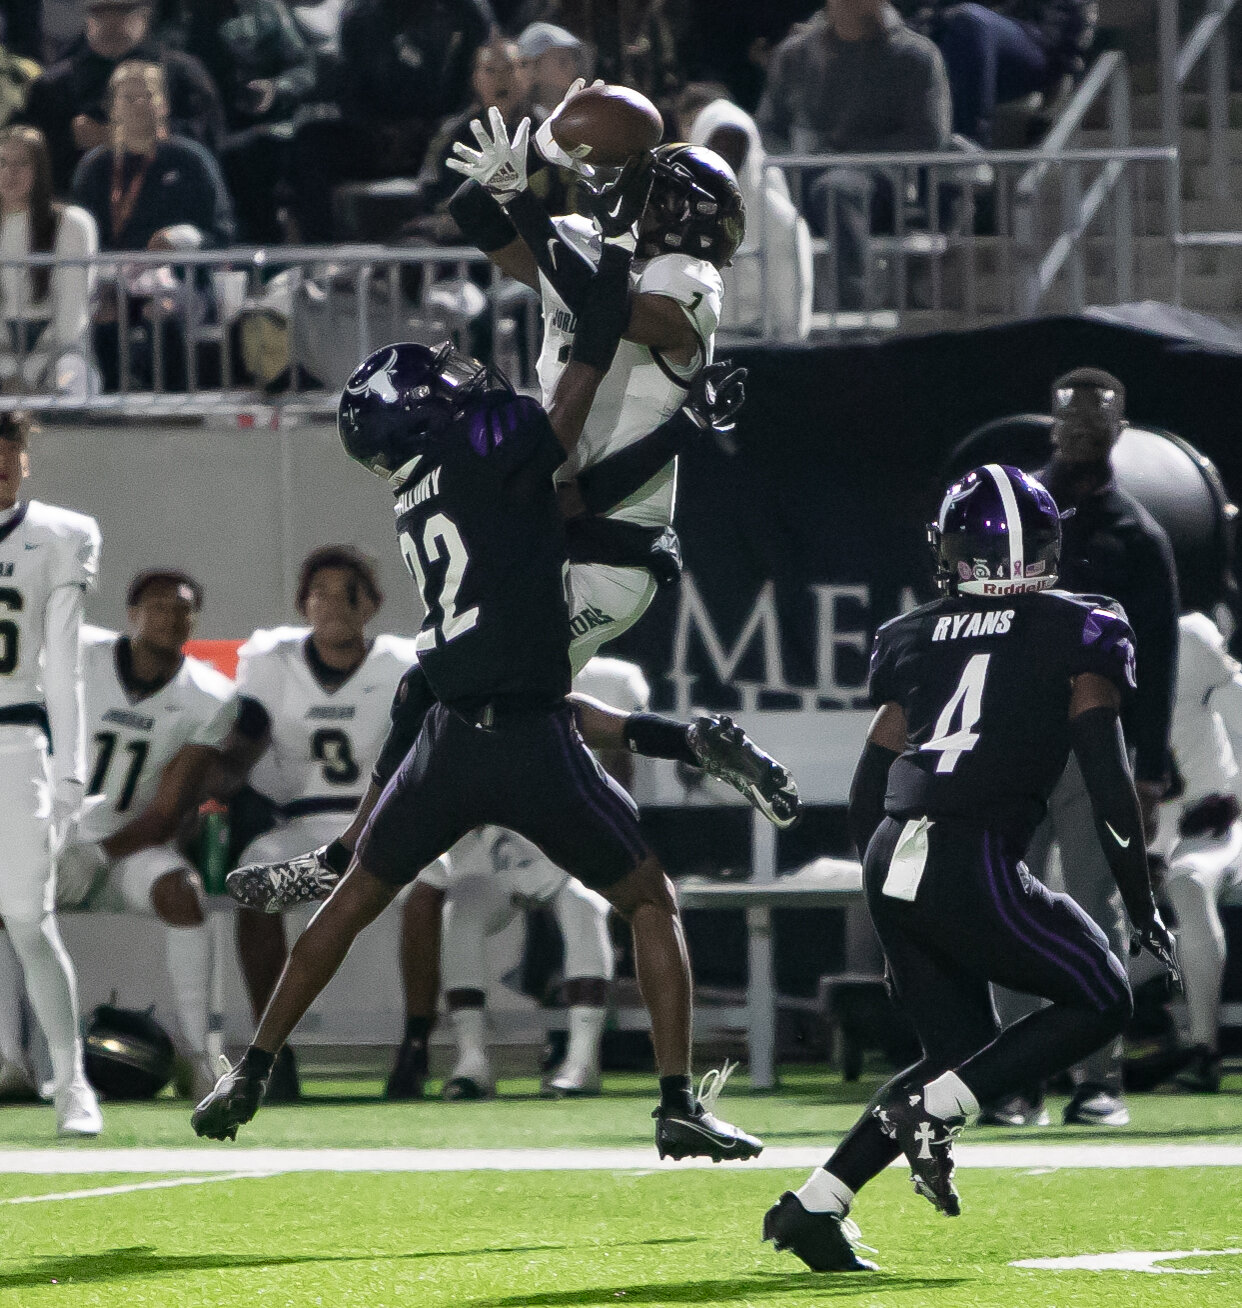 Zechariah Sample jumps to try and make a catch during Thursday's game between Jordan and Morton Ranch at Legacy Stadium.